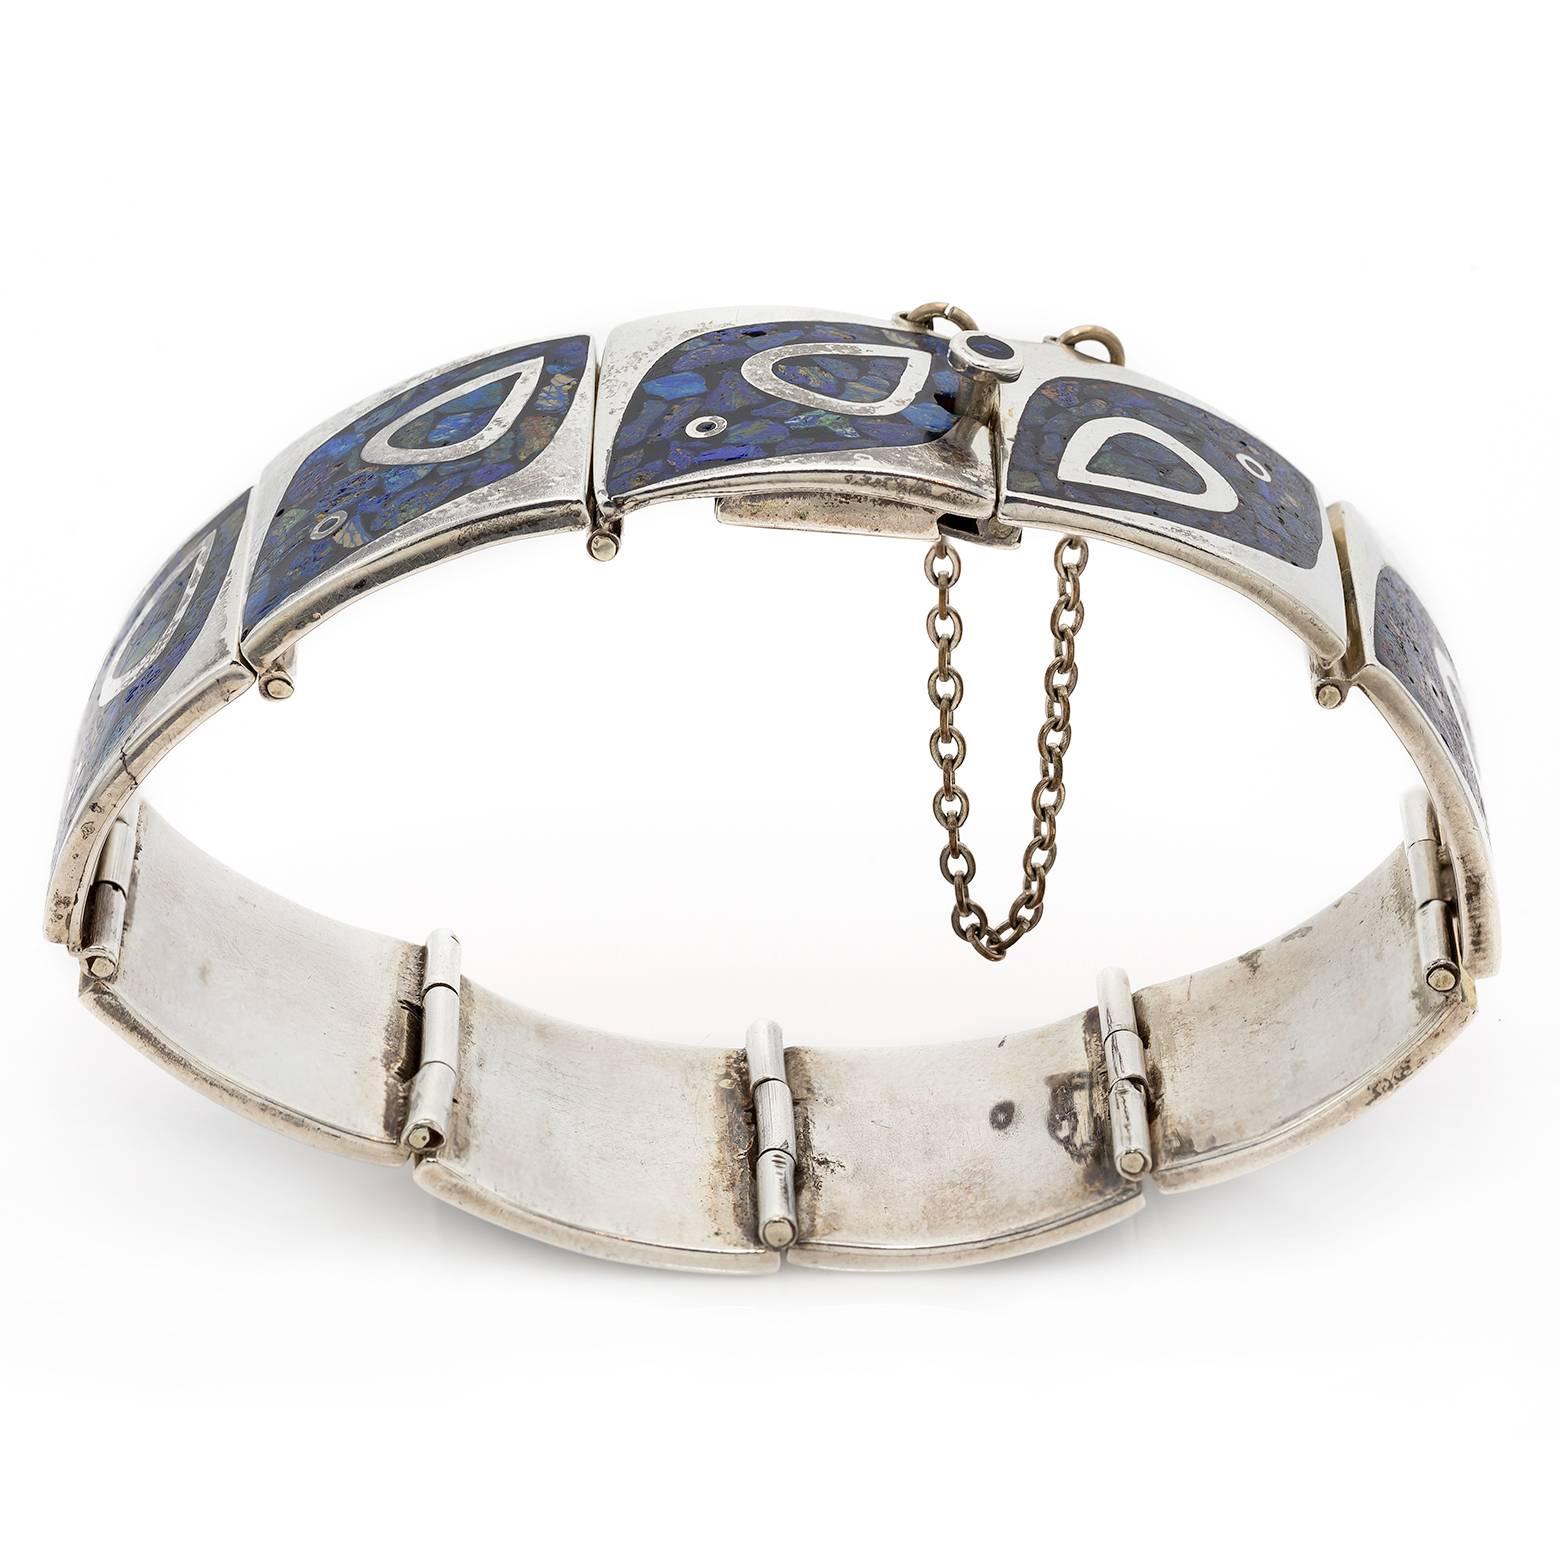 Modern Mexican Sterling Silver Link Bracelet with Lapis Inlay